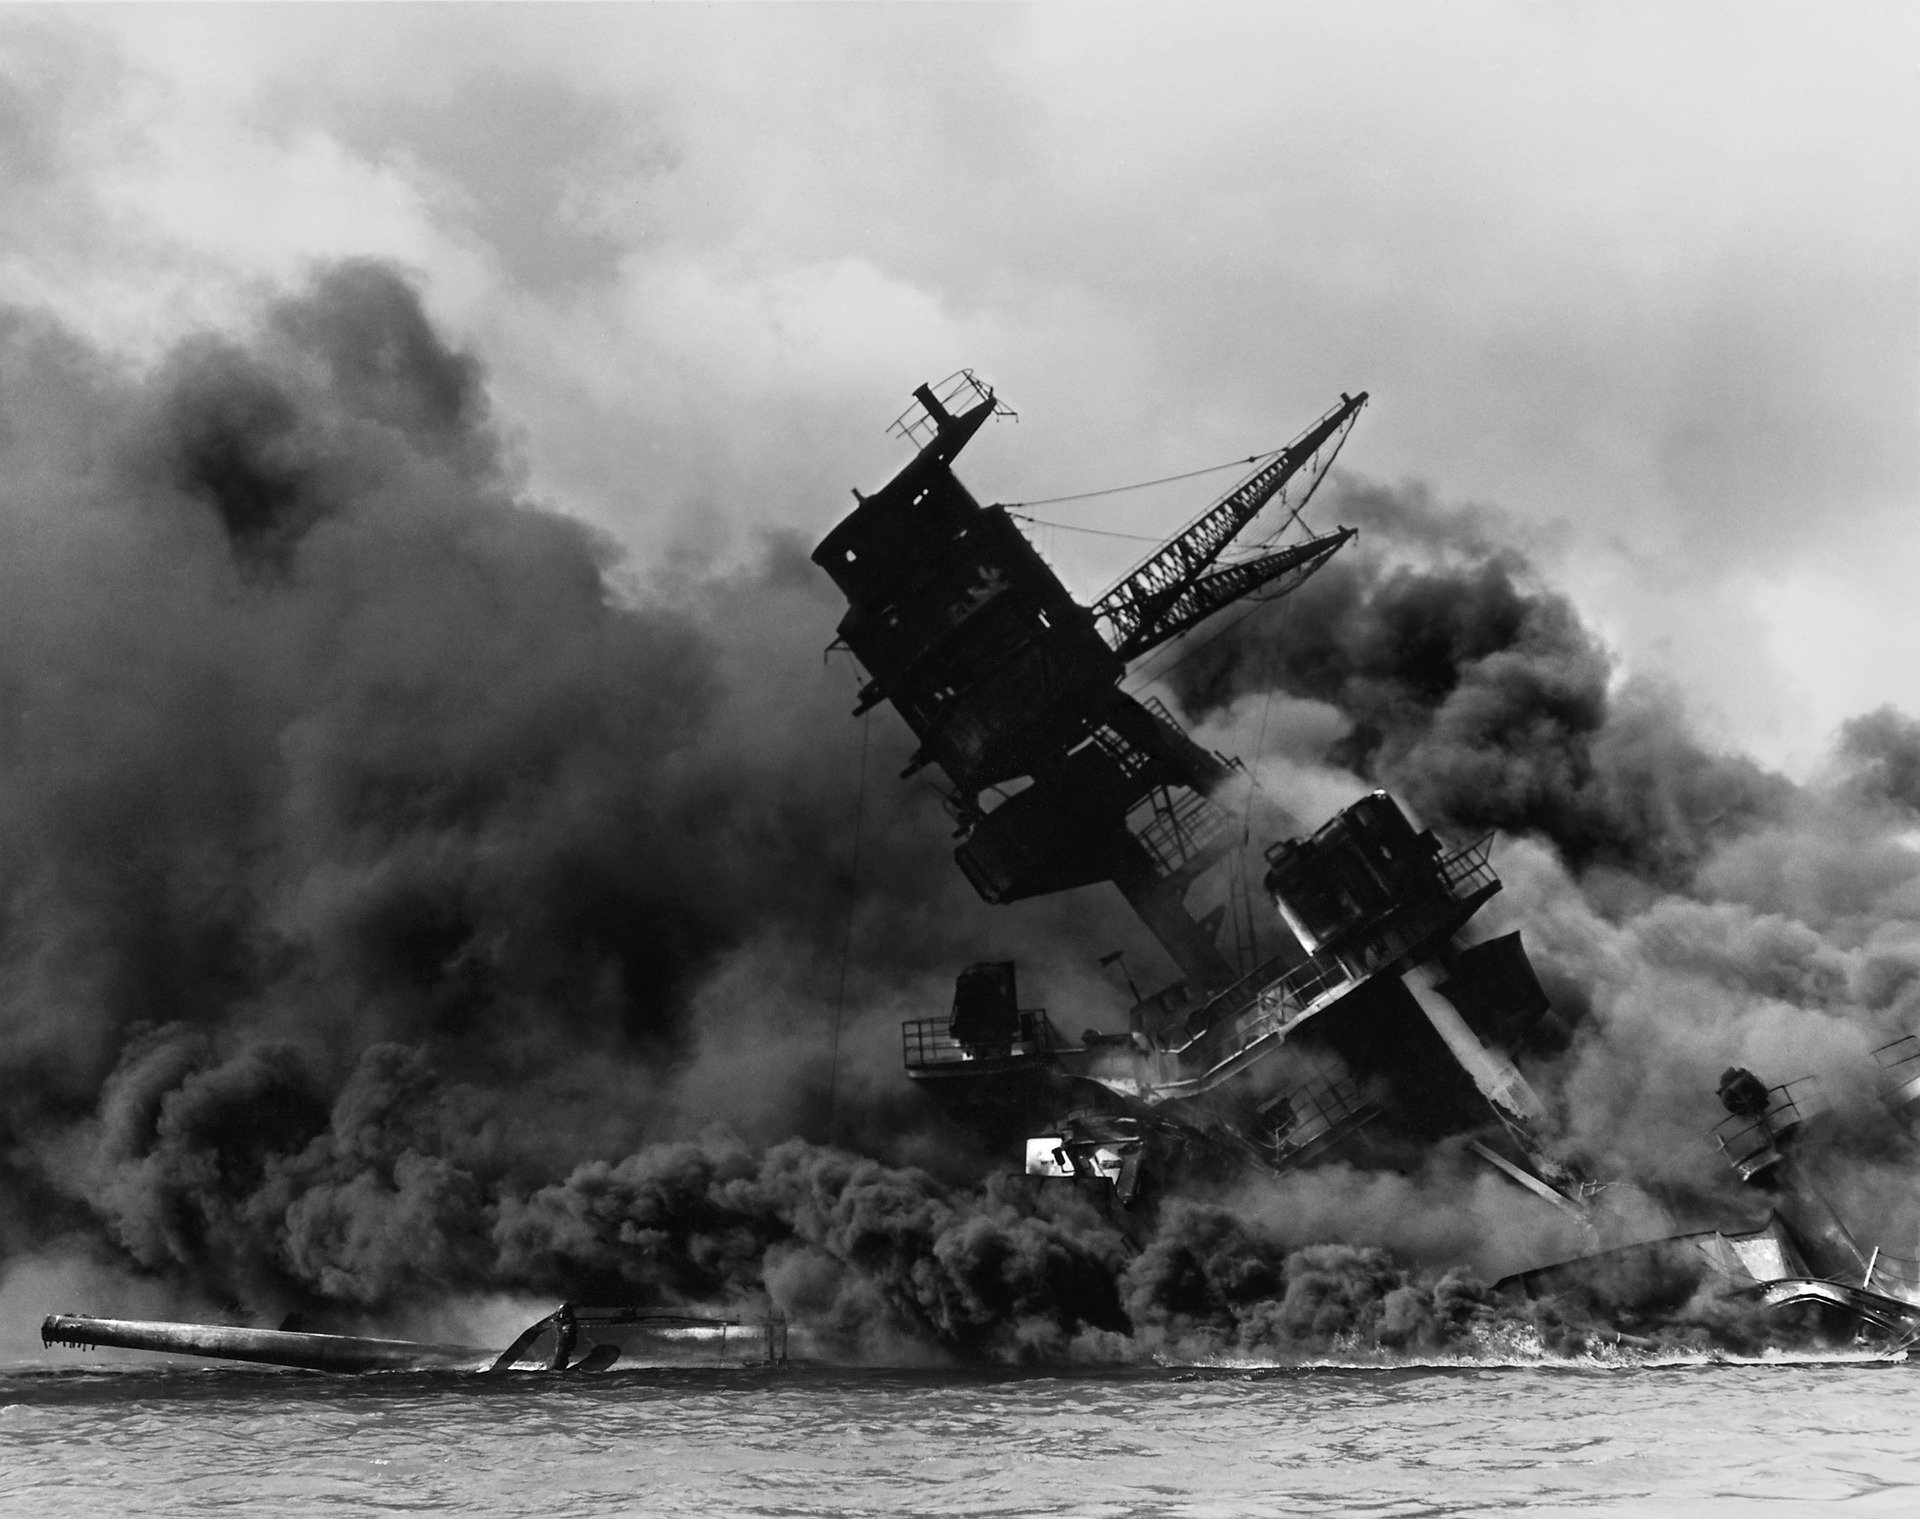 Presidential Proclamation on National Pearl Harbor Remembrance Day, 2019